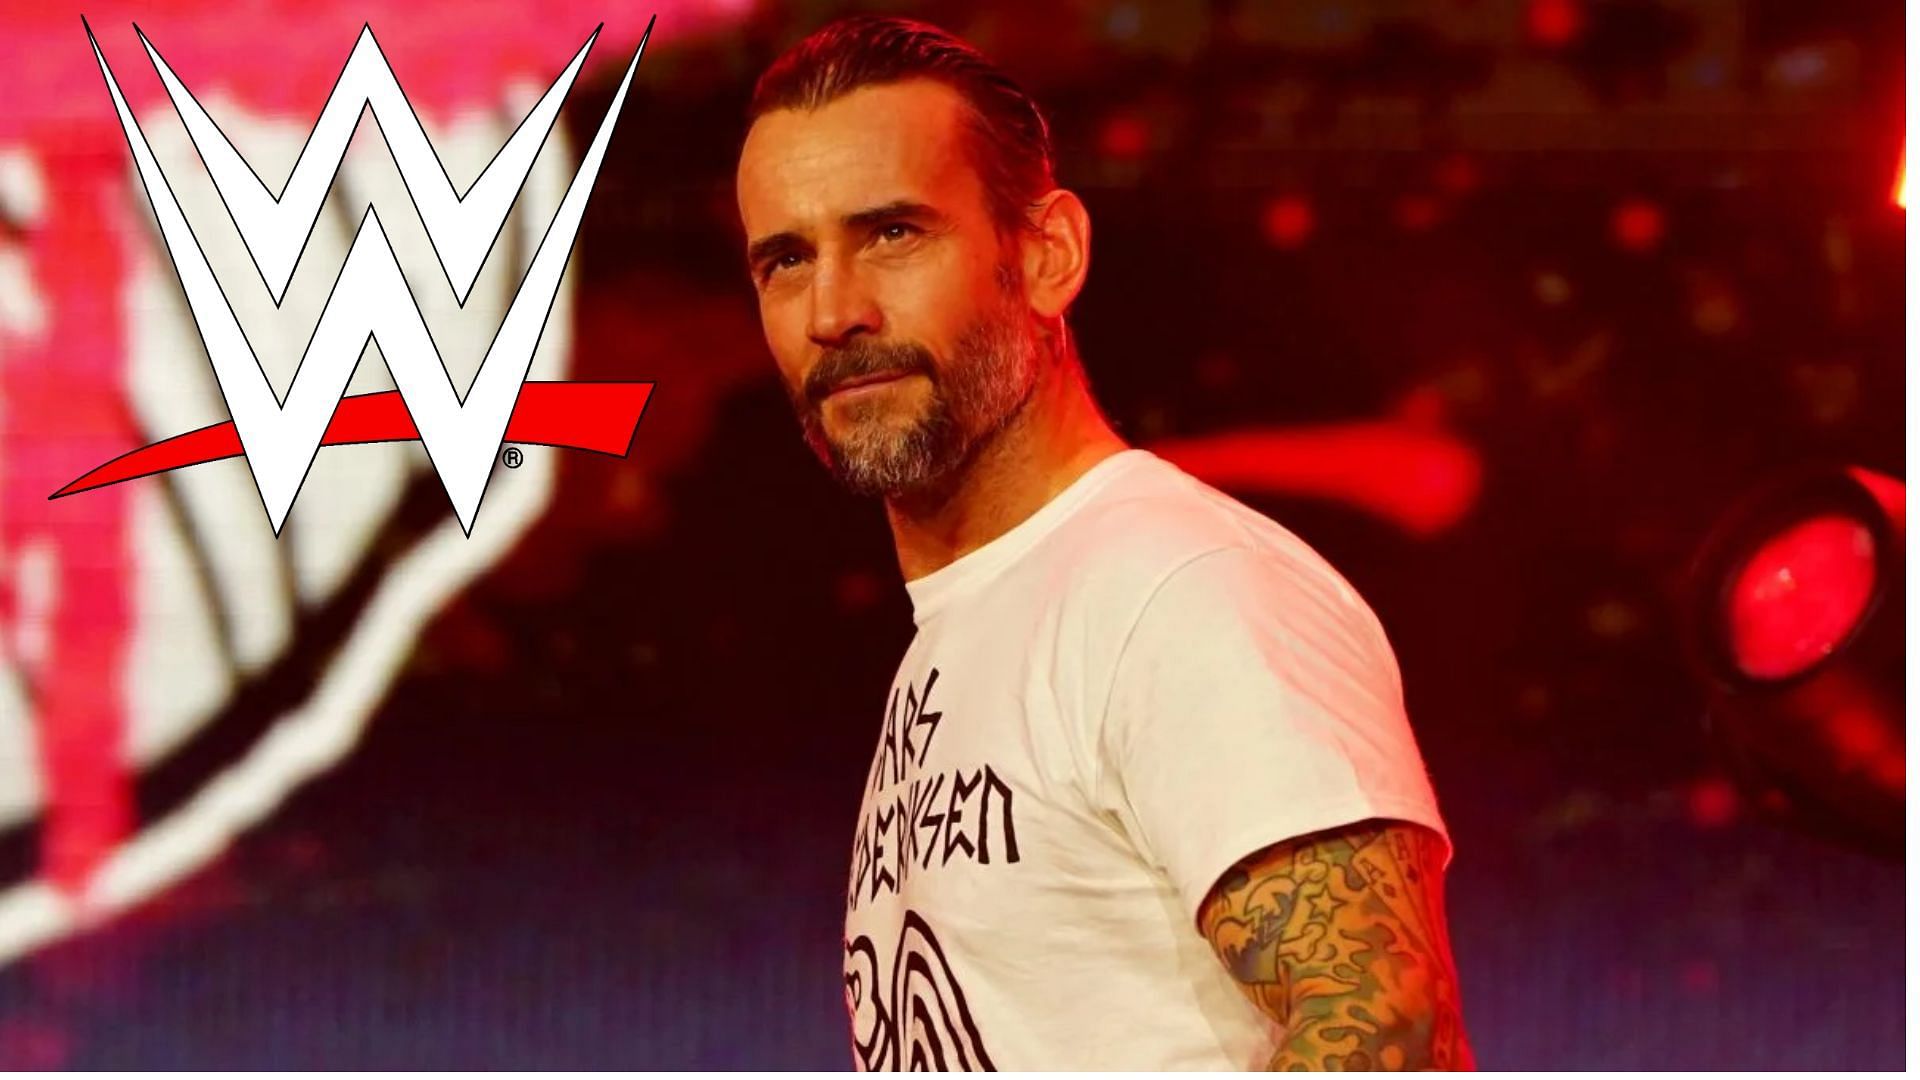 CM Punk has been a convincing heel, but did he inspire someone to hate him?